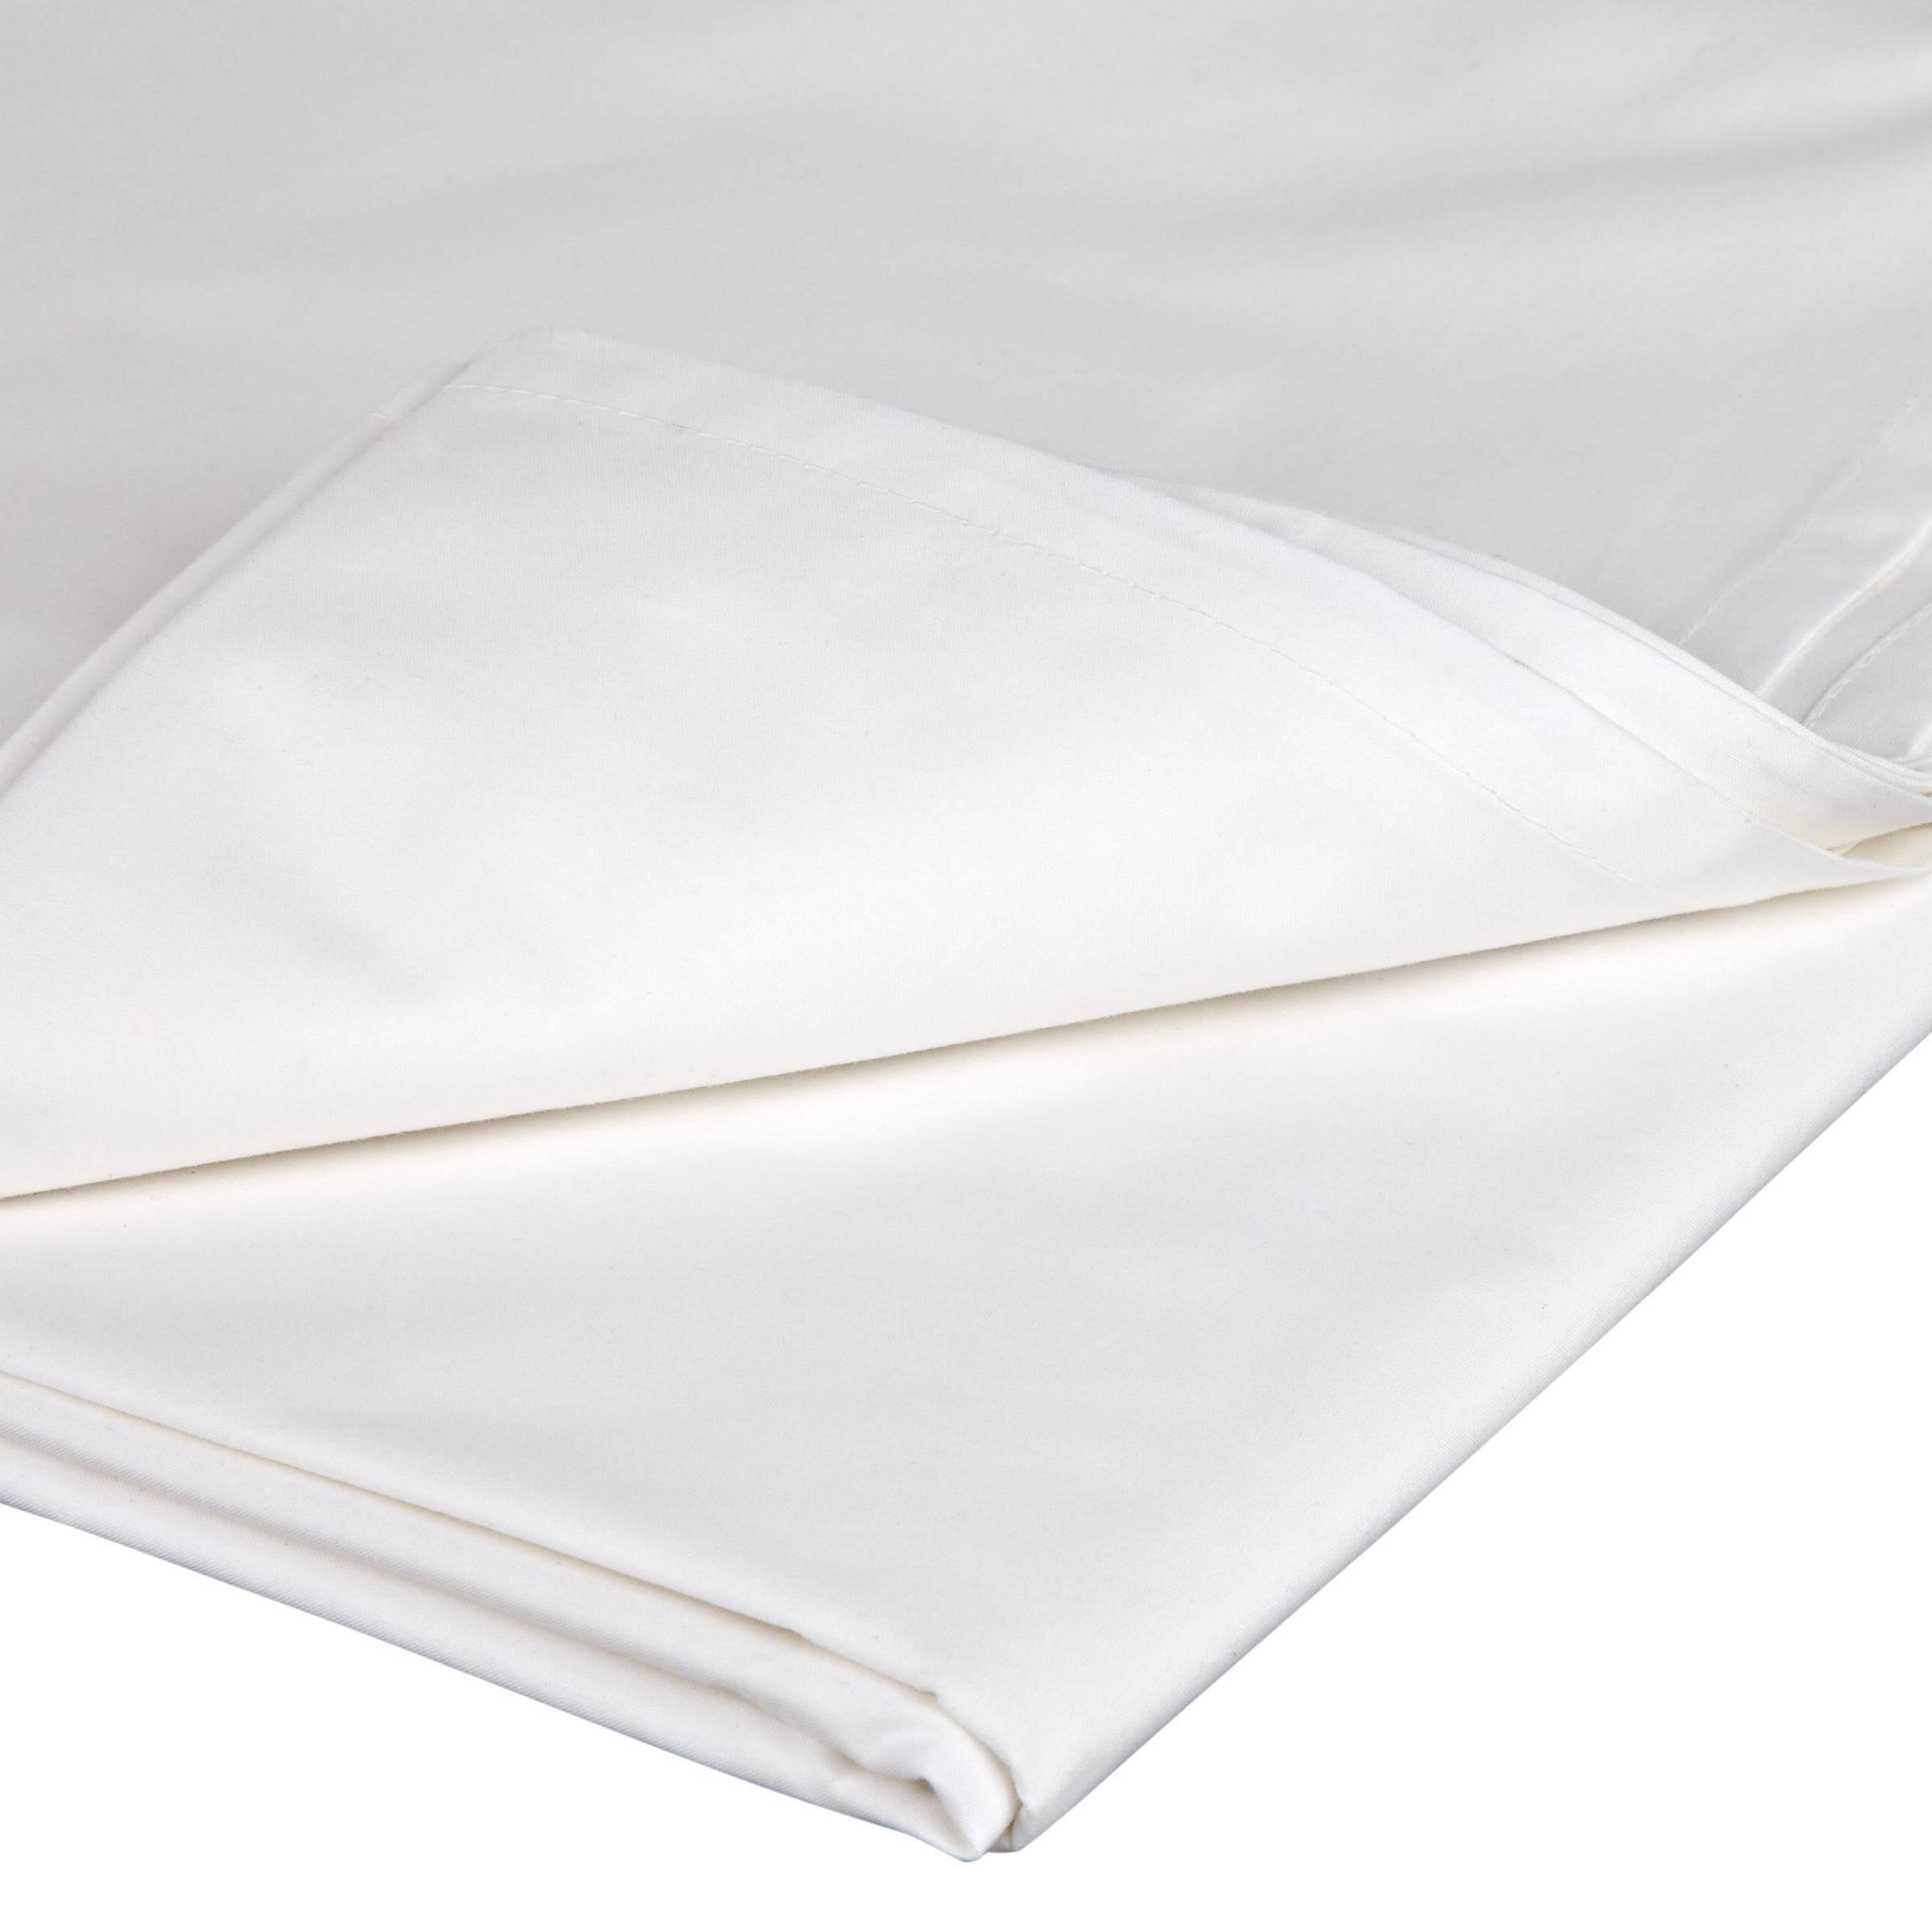 John Lewis & Partners 400 Thread Count Cotton Percale Flat Sheet